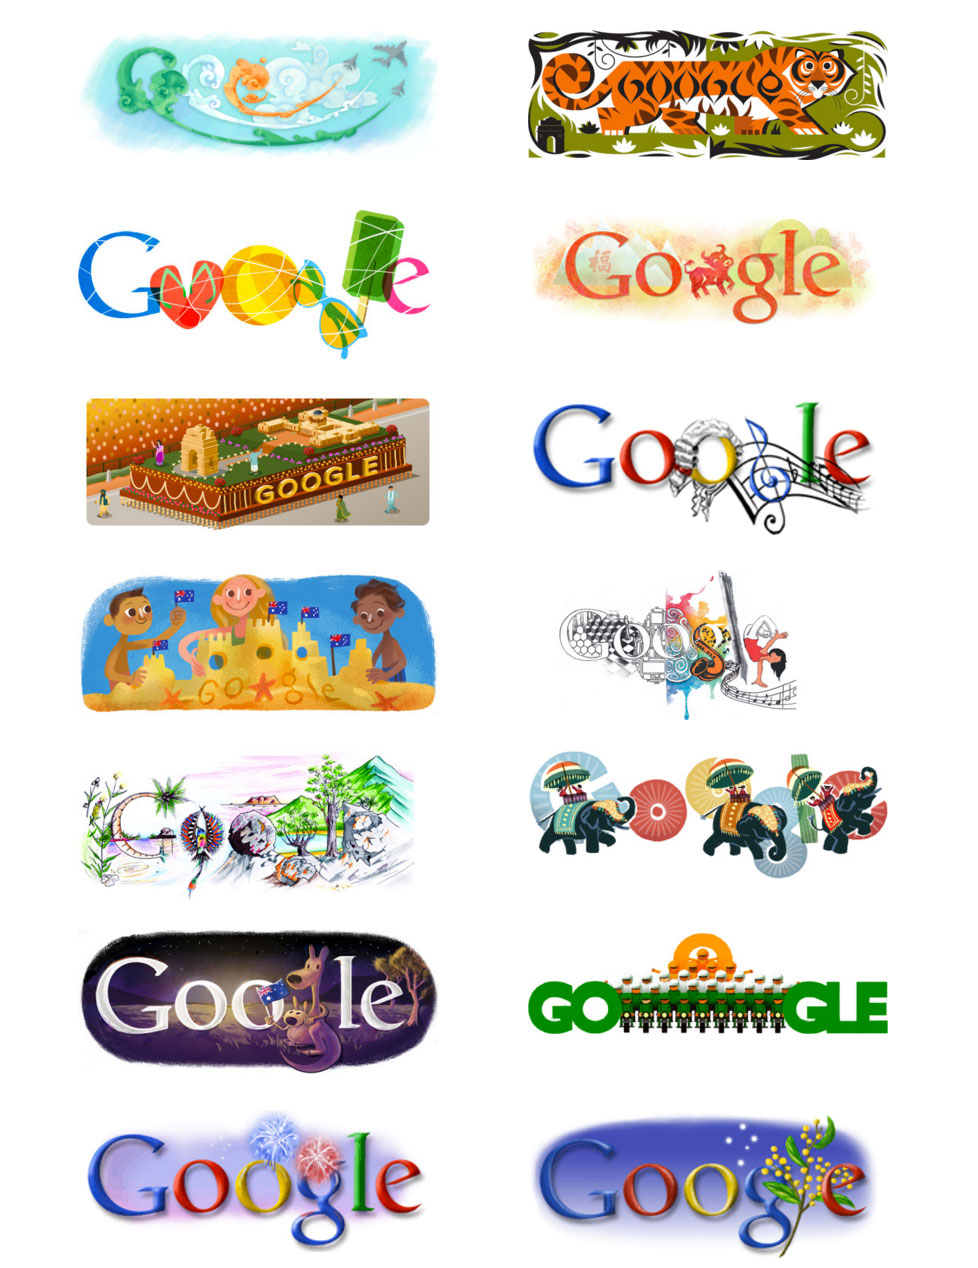 Past Google Doodles for January 26.